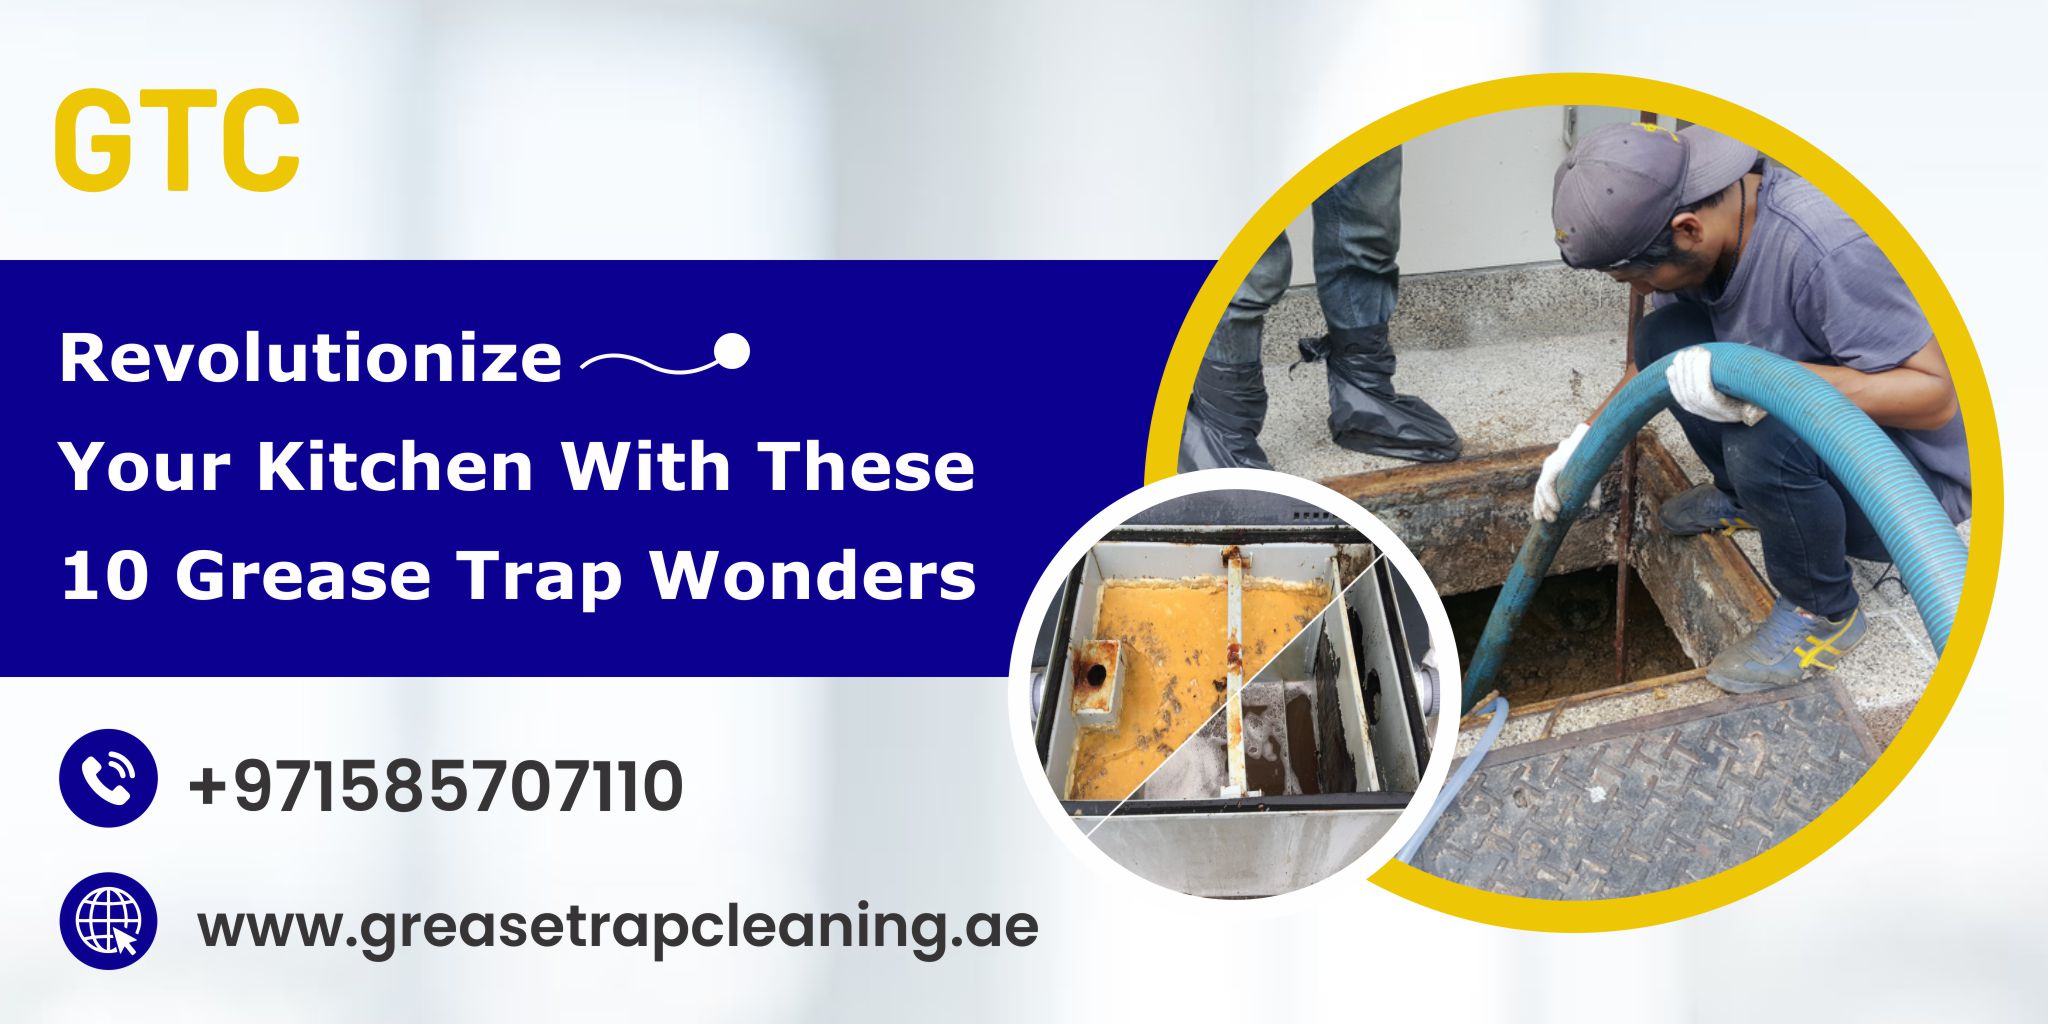 Grease trap cleaning in UAE